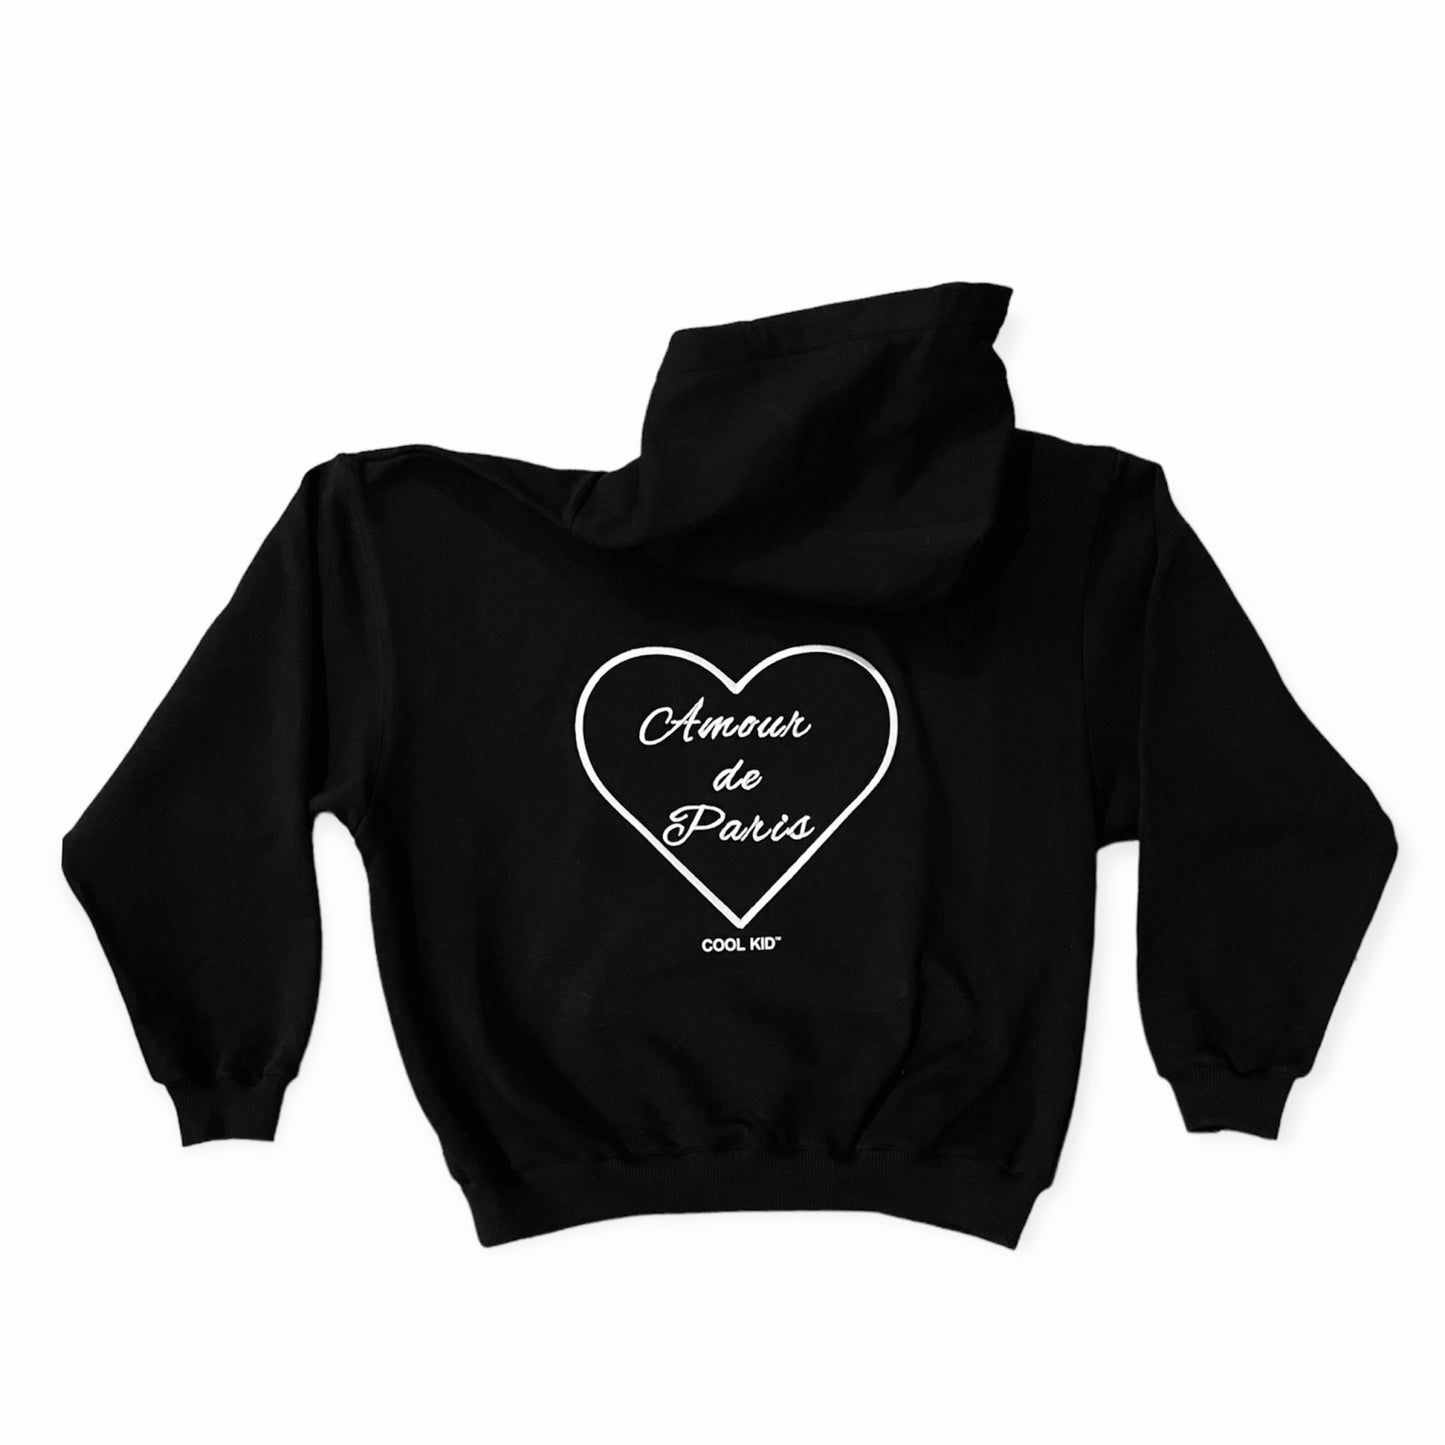 Amour hoodie